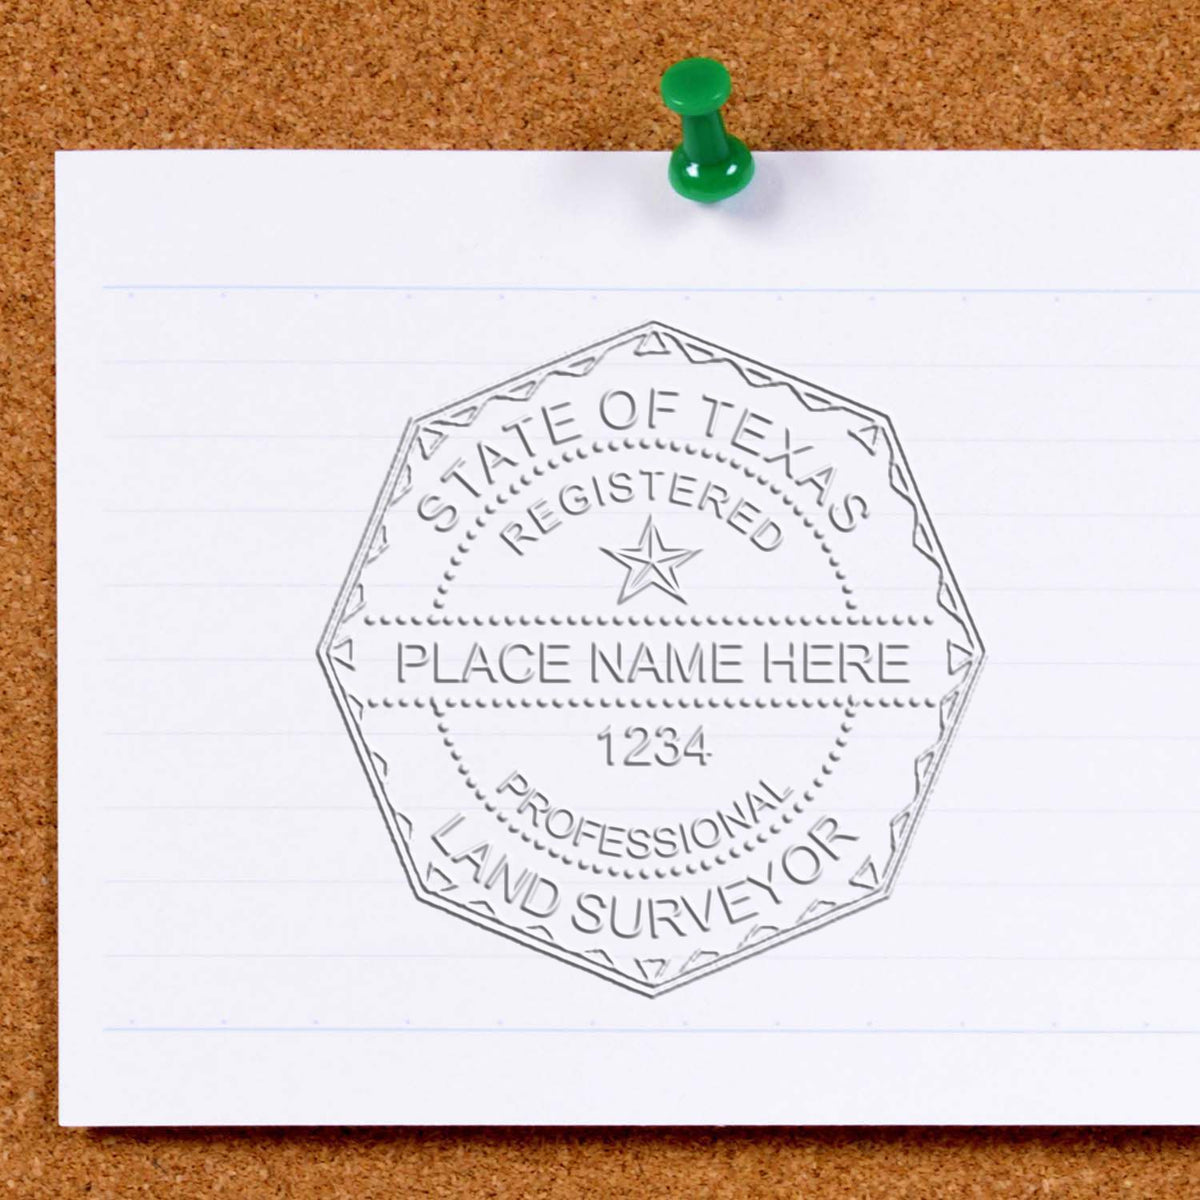 An in use photo of the Gift Texas Land Surveyor Seal showing a sample imprint on a cardstock